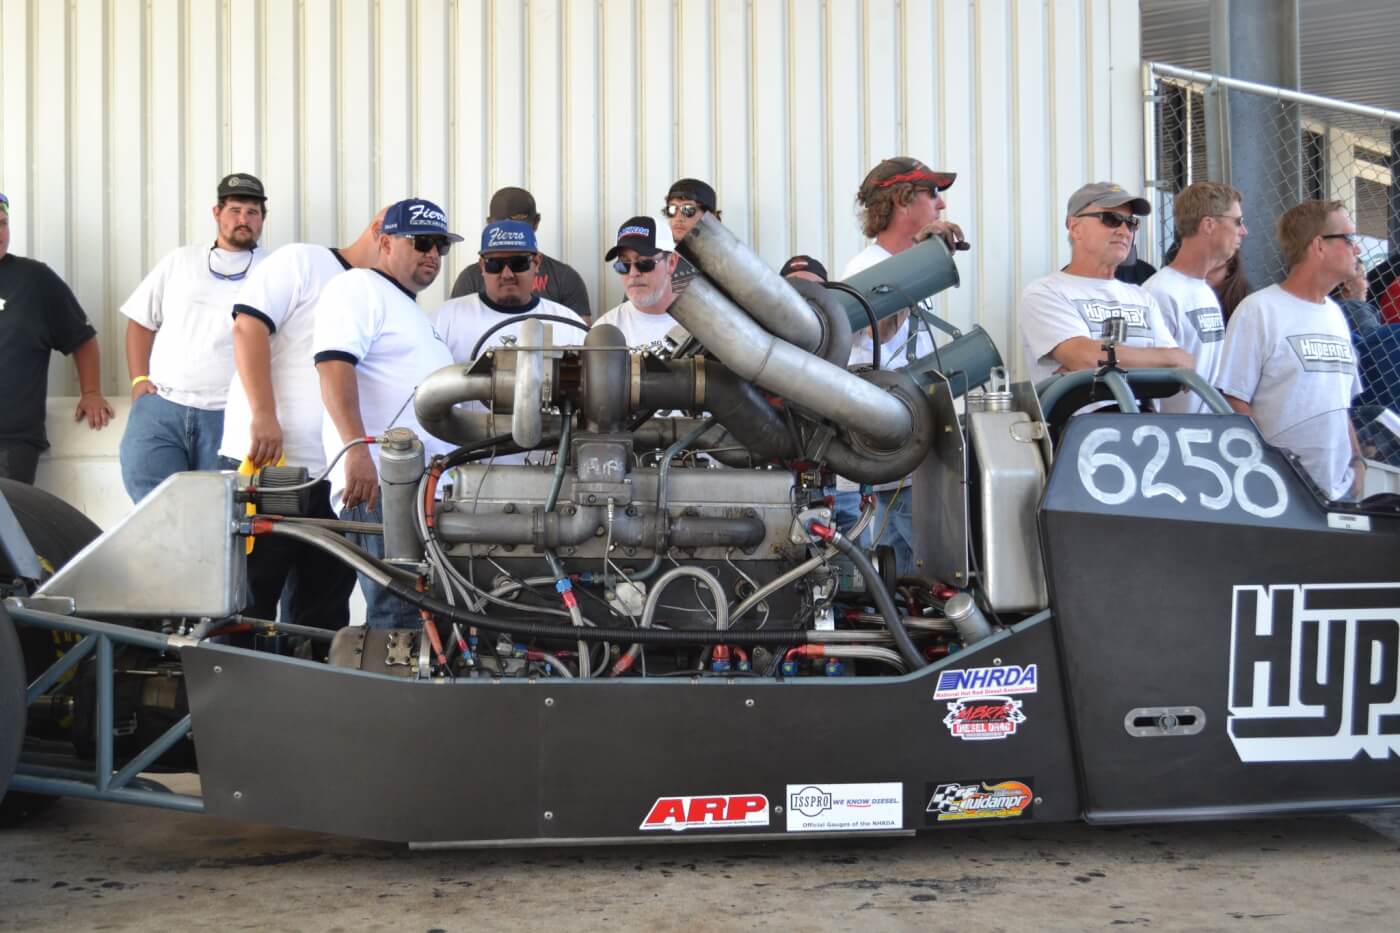 Perhaps the most awe-inspiring vehicle in attendance was the triple-turbo, 3,000 horsepower Hypermax dragster. Based on a DT466 platform, the stroked 8.2L engine powered the rail to high 6-second passes all weekend.